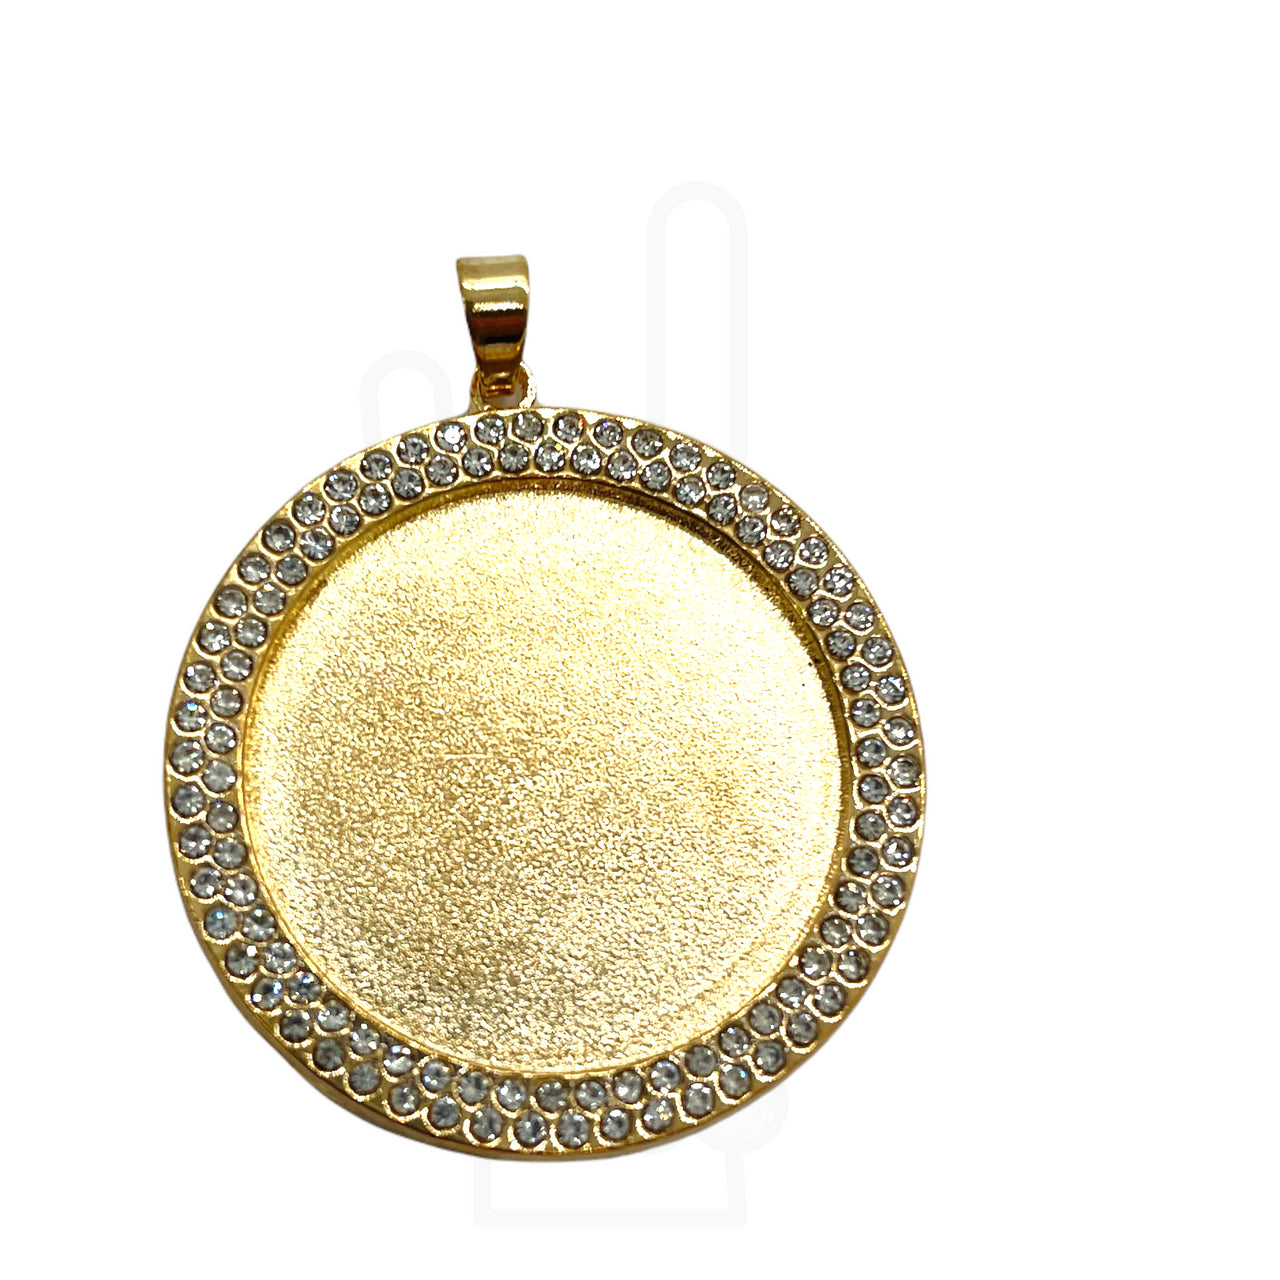 30mm Round Bezel with Rhinestones & Pinch Clips Pendant Blank for UV or Epoxy Resin